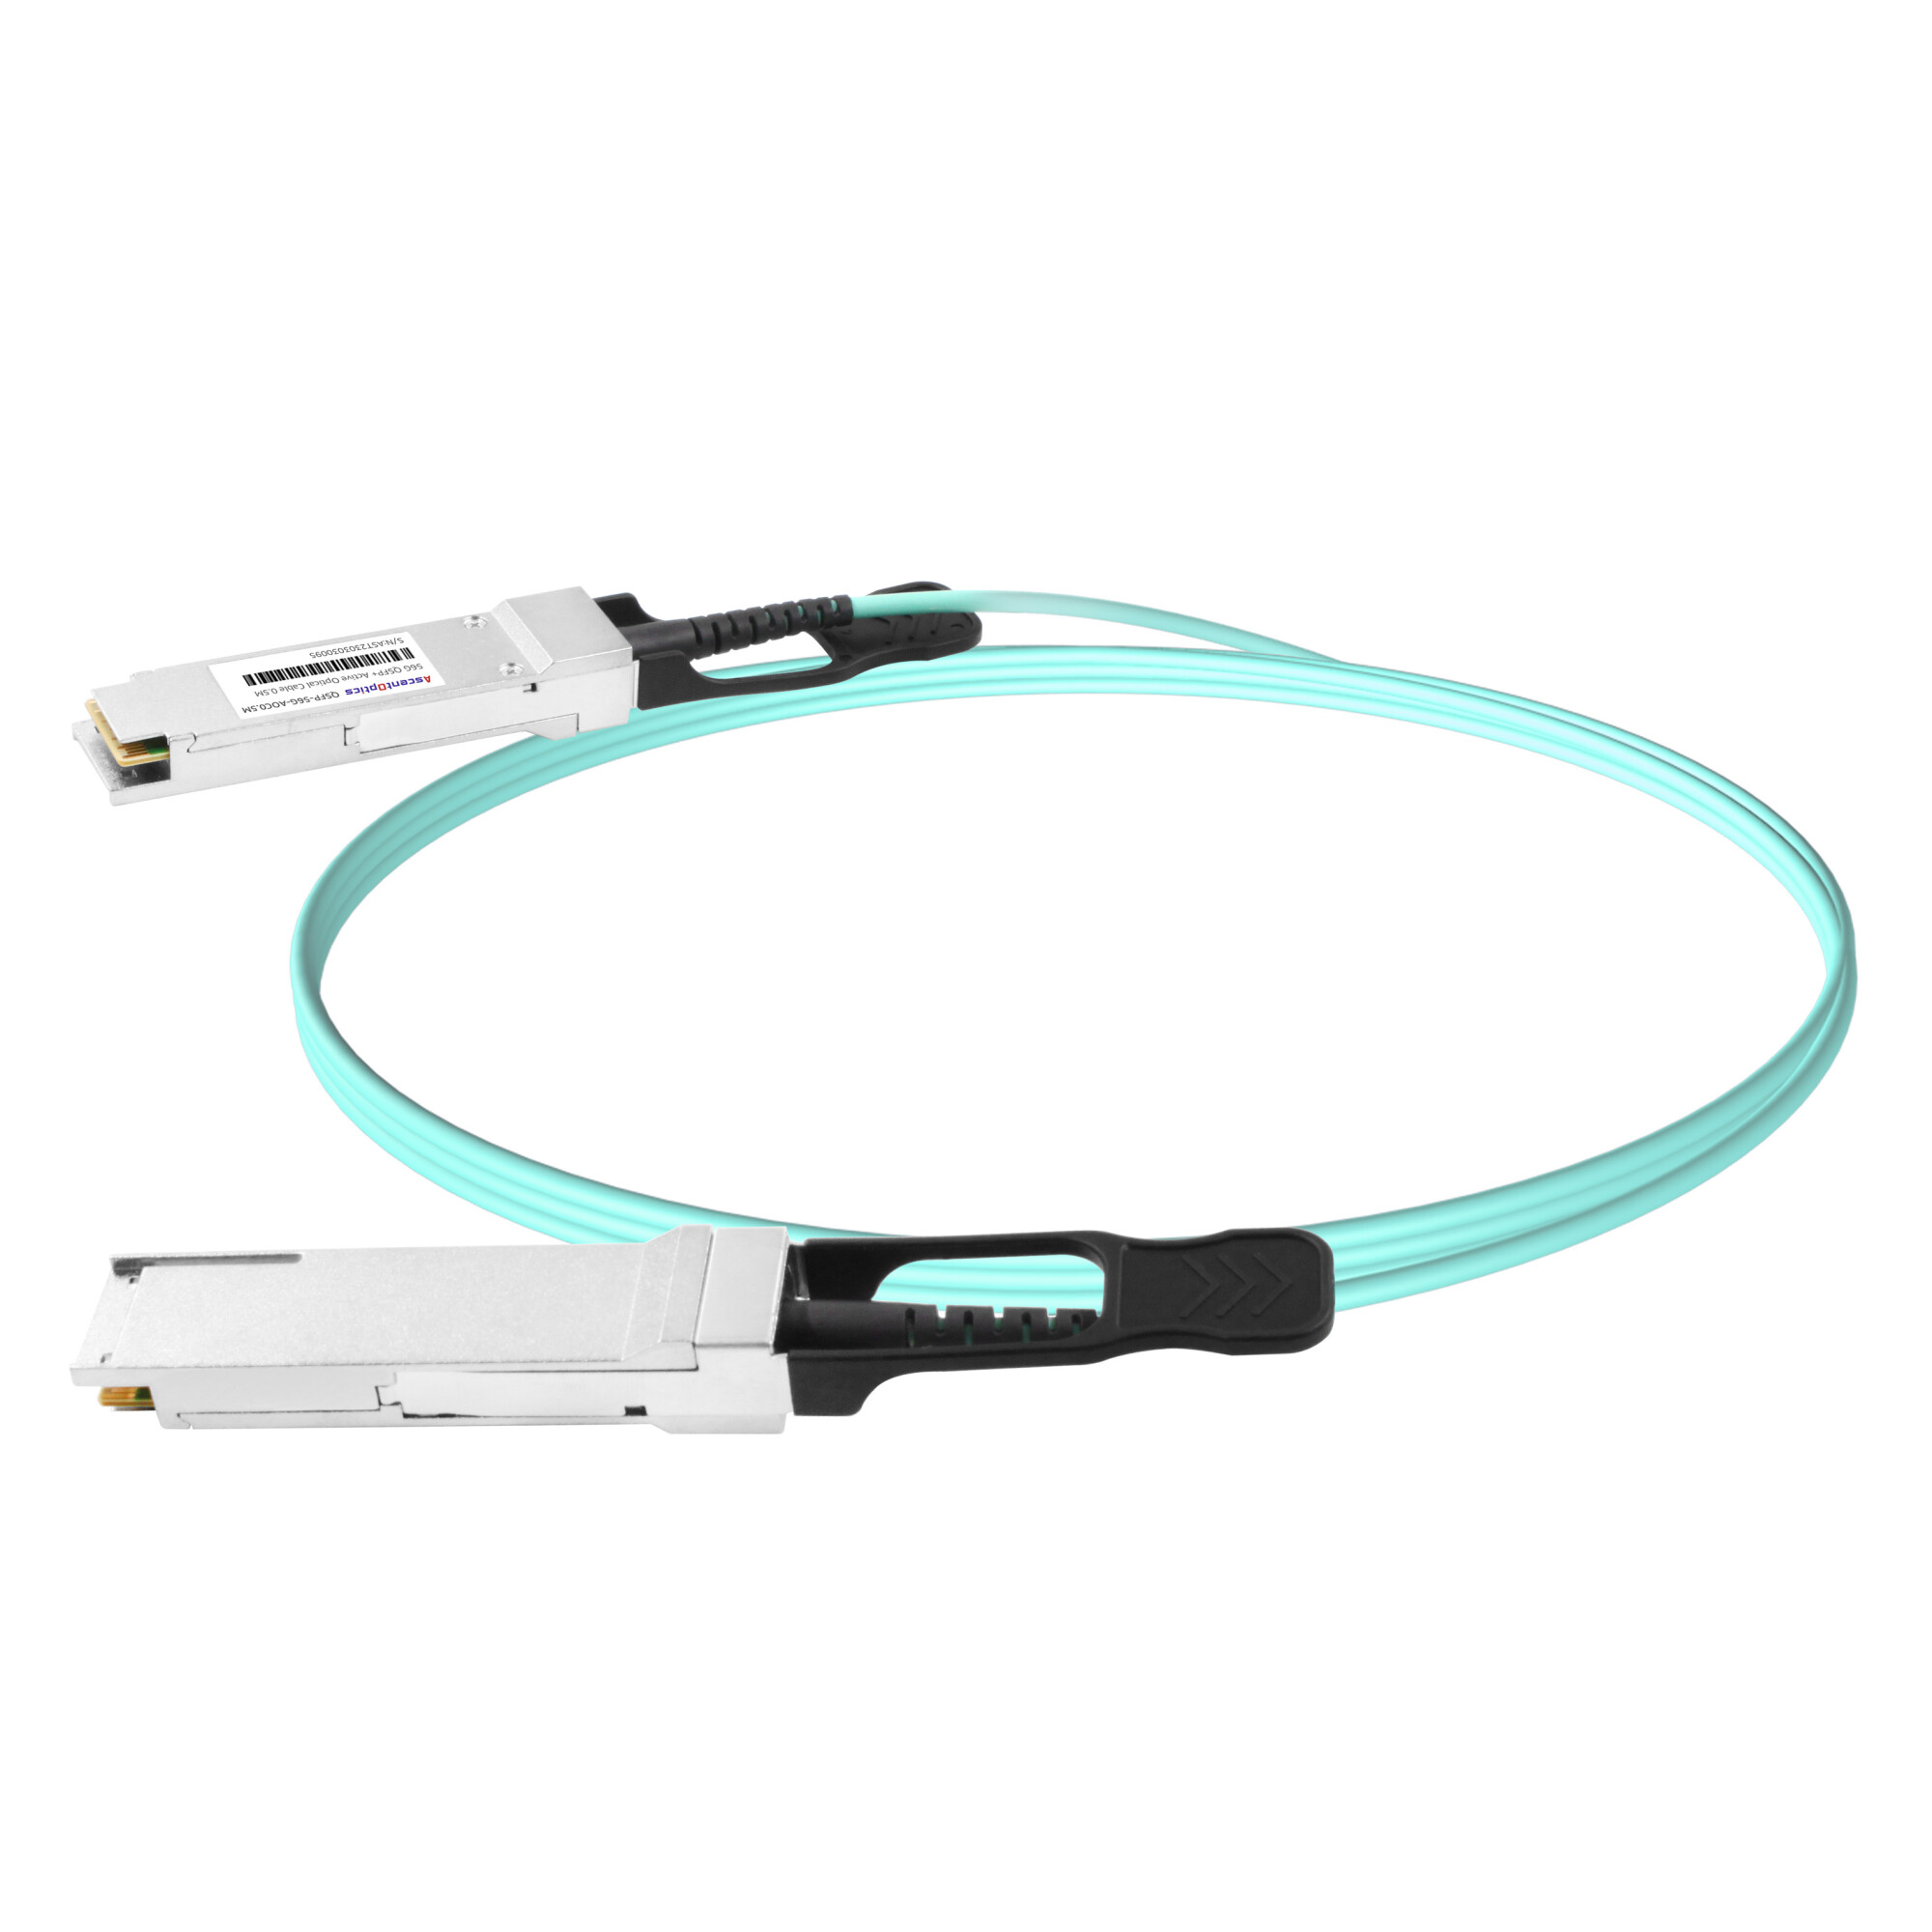 56G QSFP+ Active Optical Cable,xx Meter